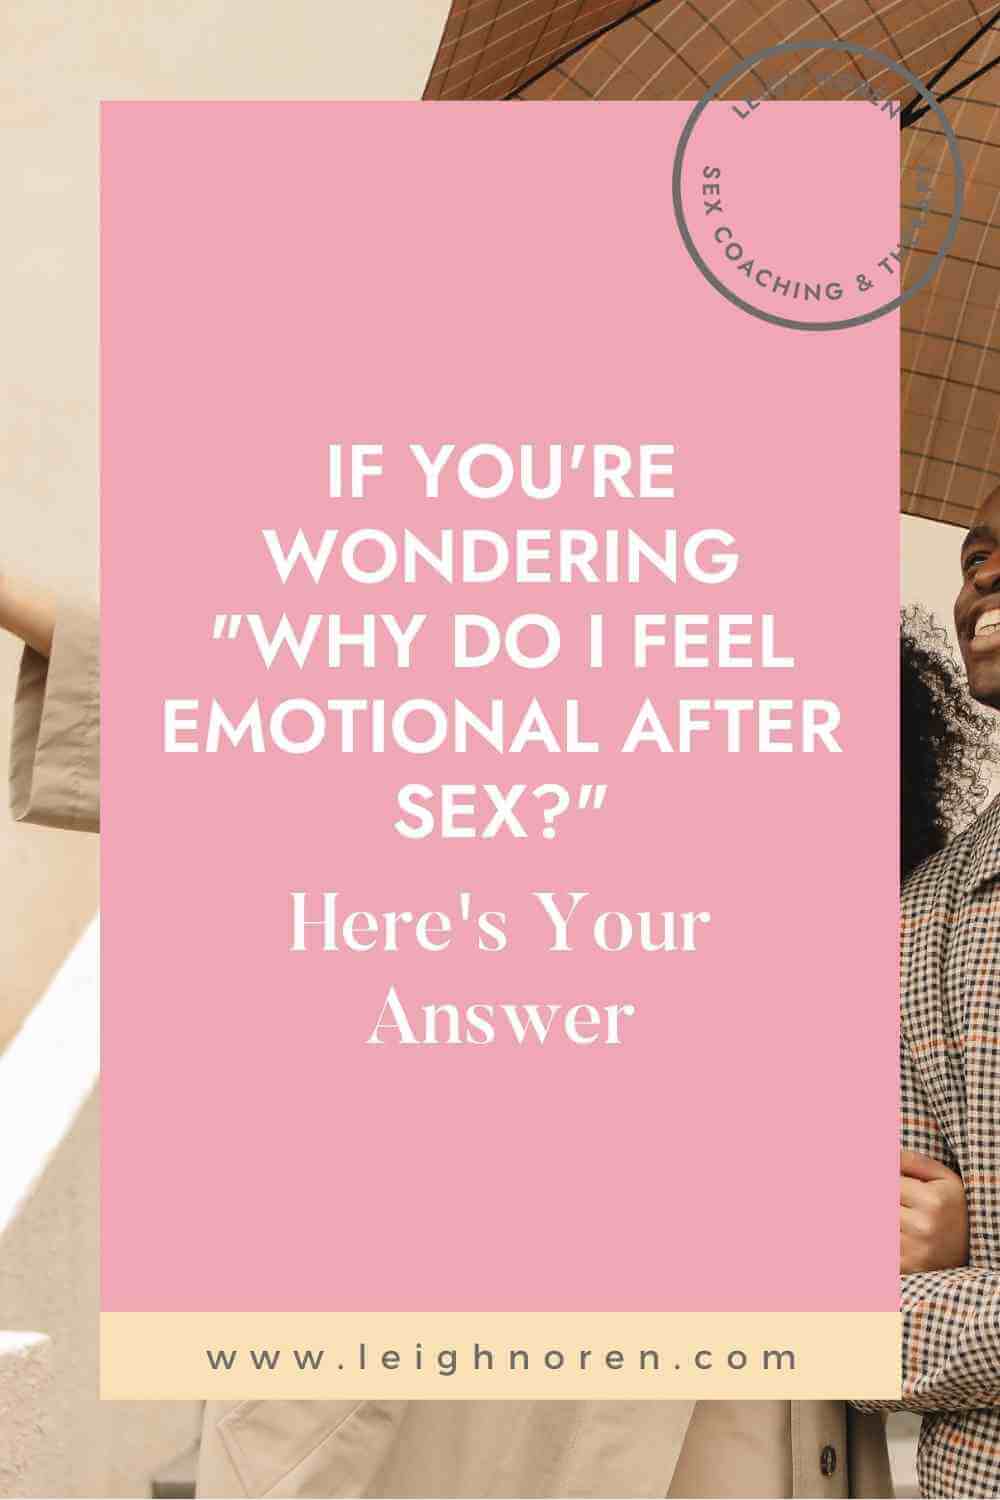 If You're Wondering "Why Do I Feel Emotional After Sex?" Here's Your Answer